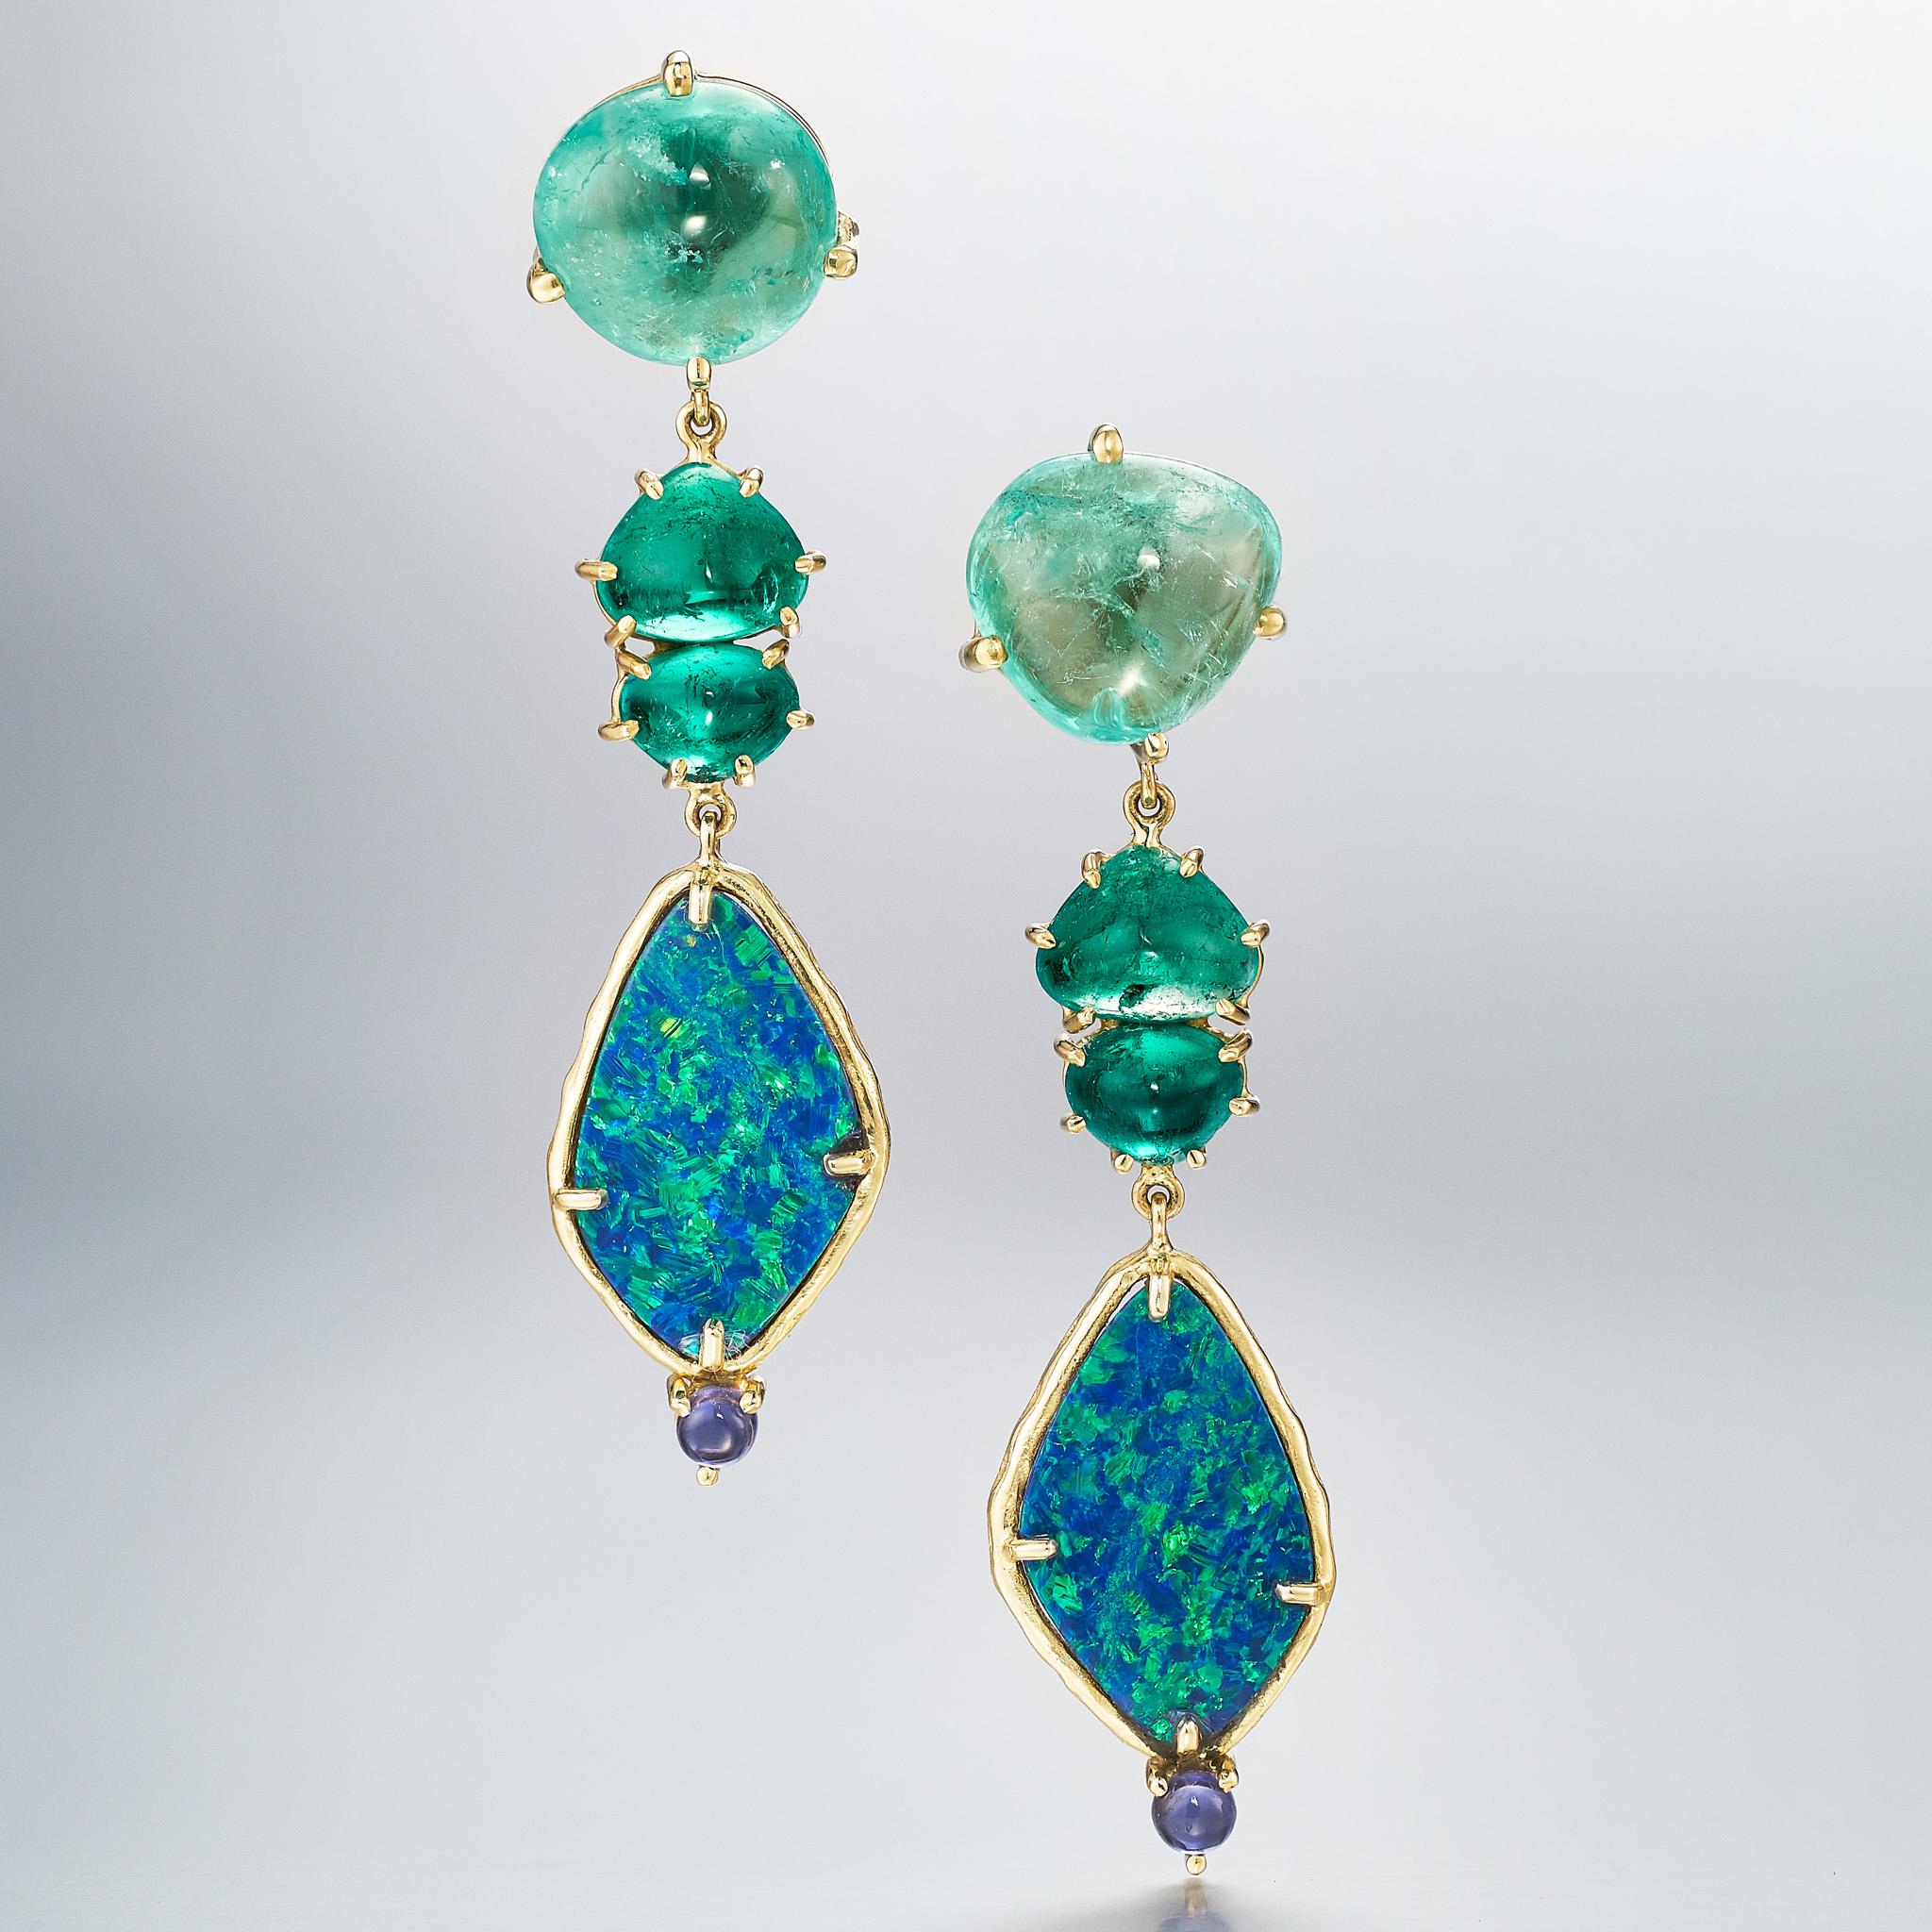 In collaboration with Muzo, the famed emerald mines in Colombia, these earrings feature 16.50 carats of free-form nugget and trillion cabochon-cut emeralds, and 7.37carats of black opal doublet on natural matrix. A small accent of navy iolite